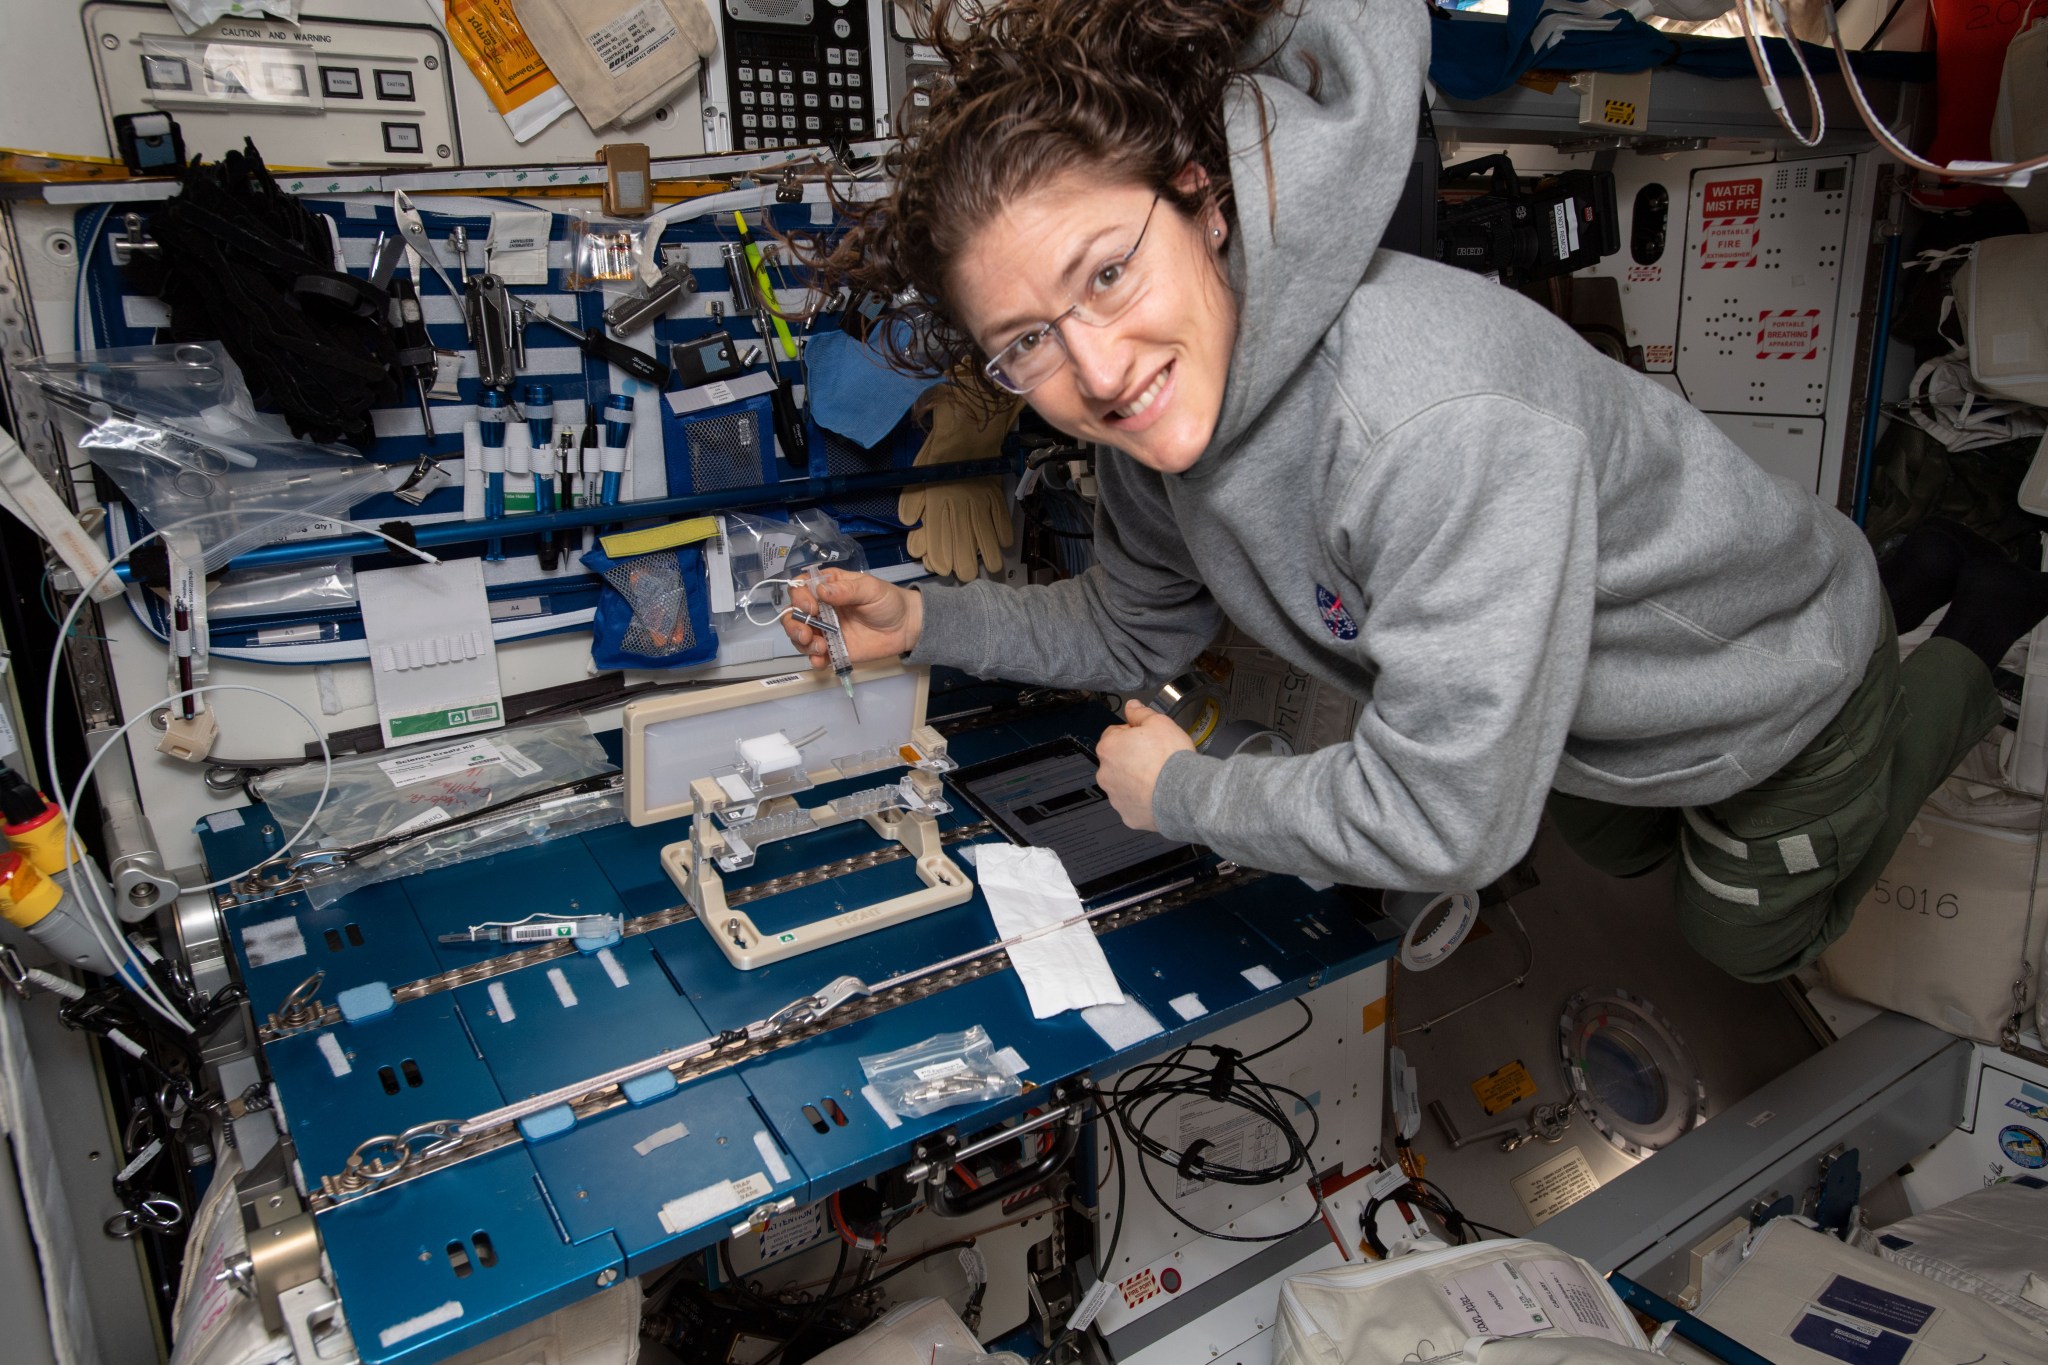 NASA astronaut Christina Koch checks out hardware for the Capillary Structures experiment.